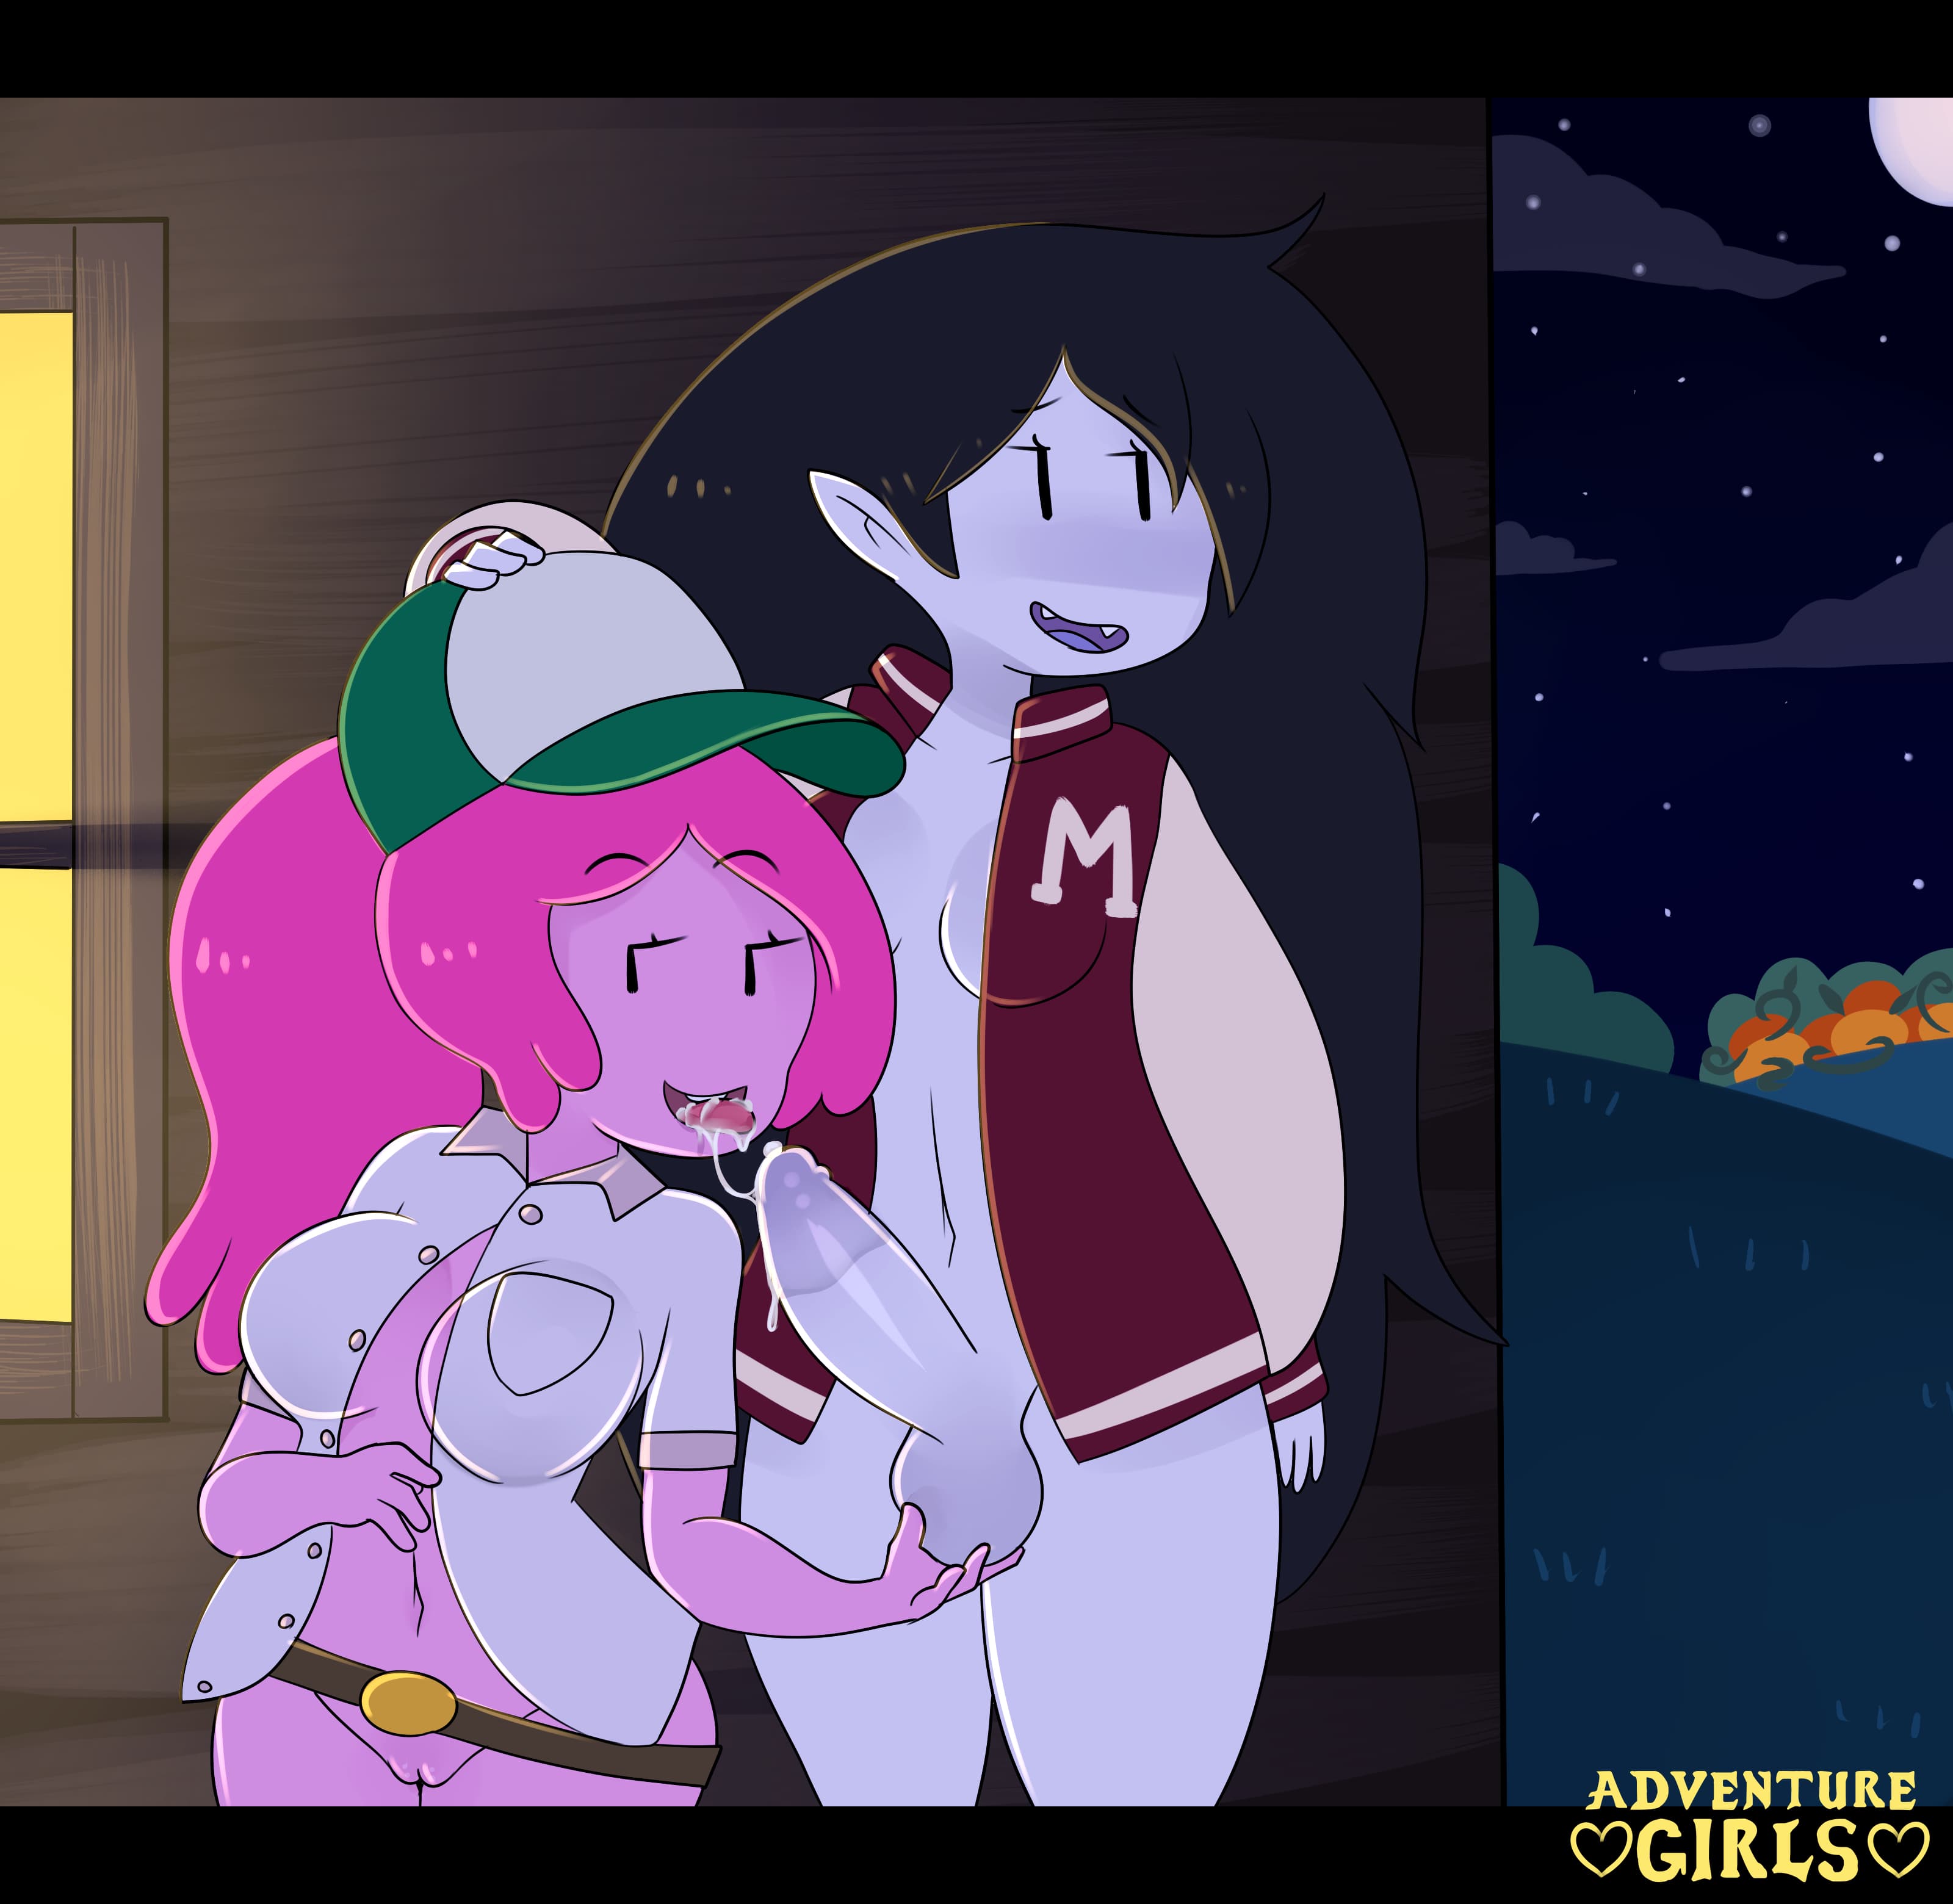 Don recommend best of futa adventure time